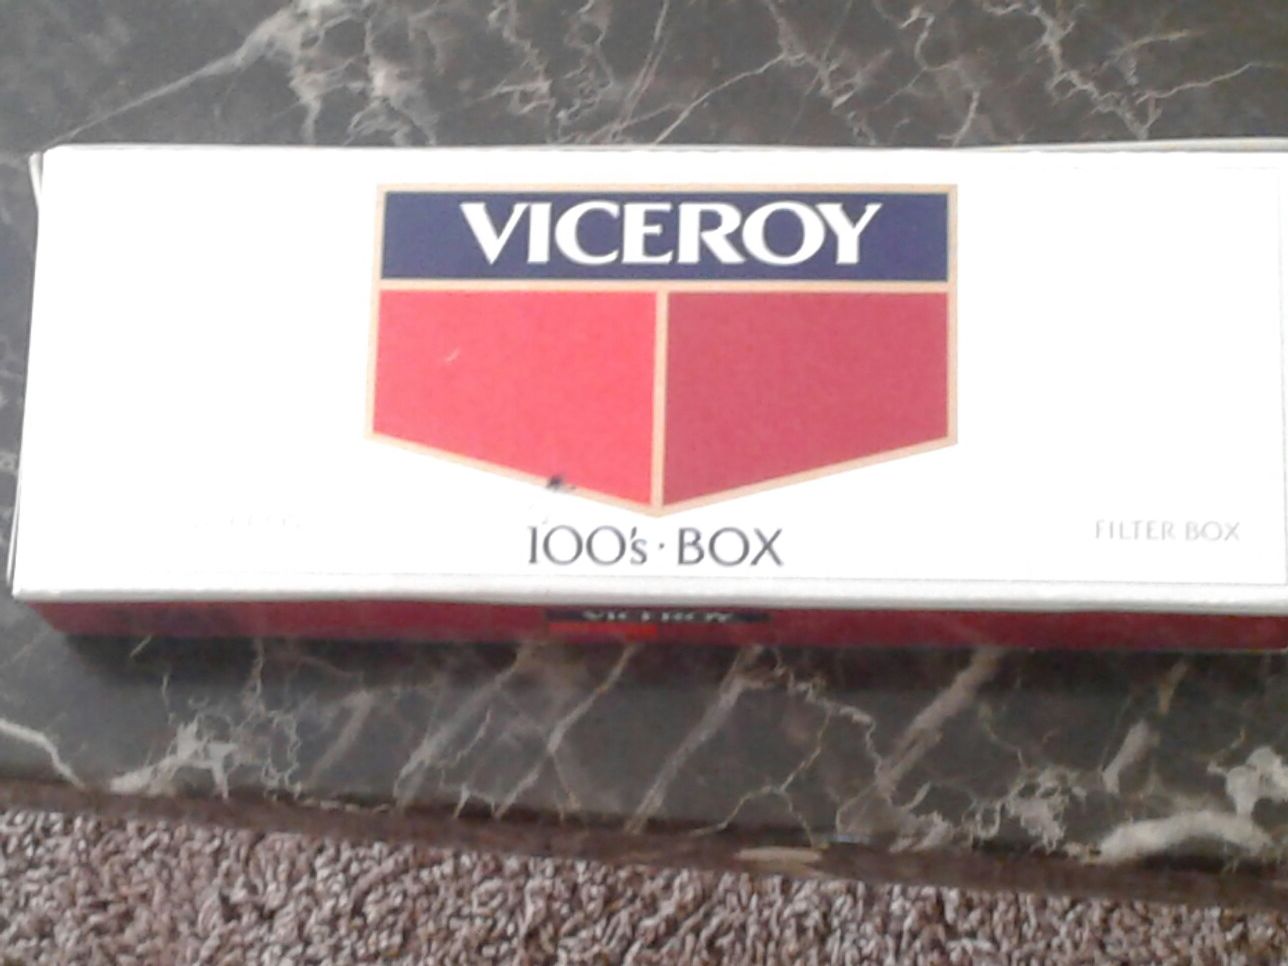 Viceroy cartons never opened